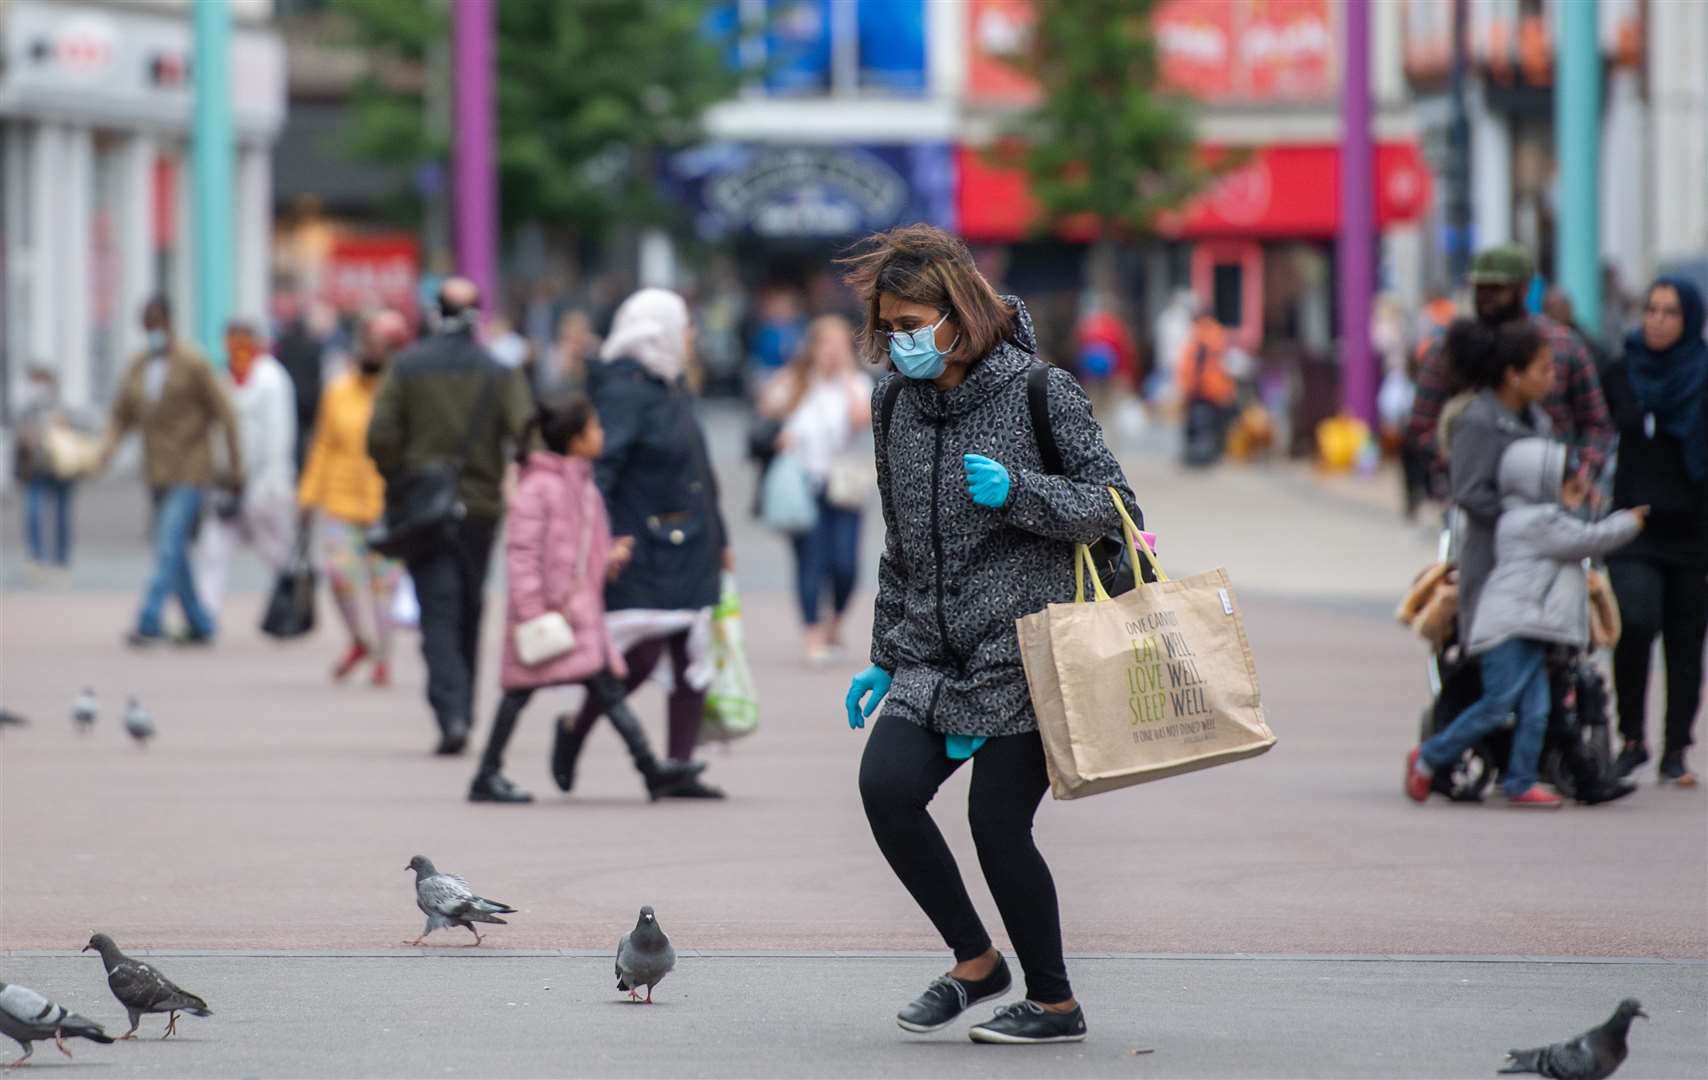 Shoppers on Humberstone Gate in Leicester (Joe Giddens/PA)